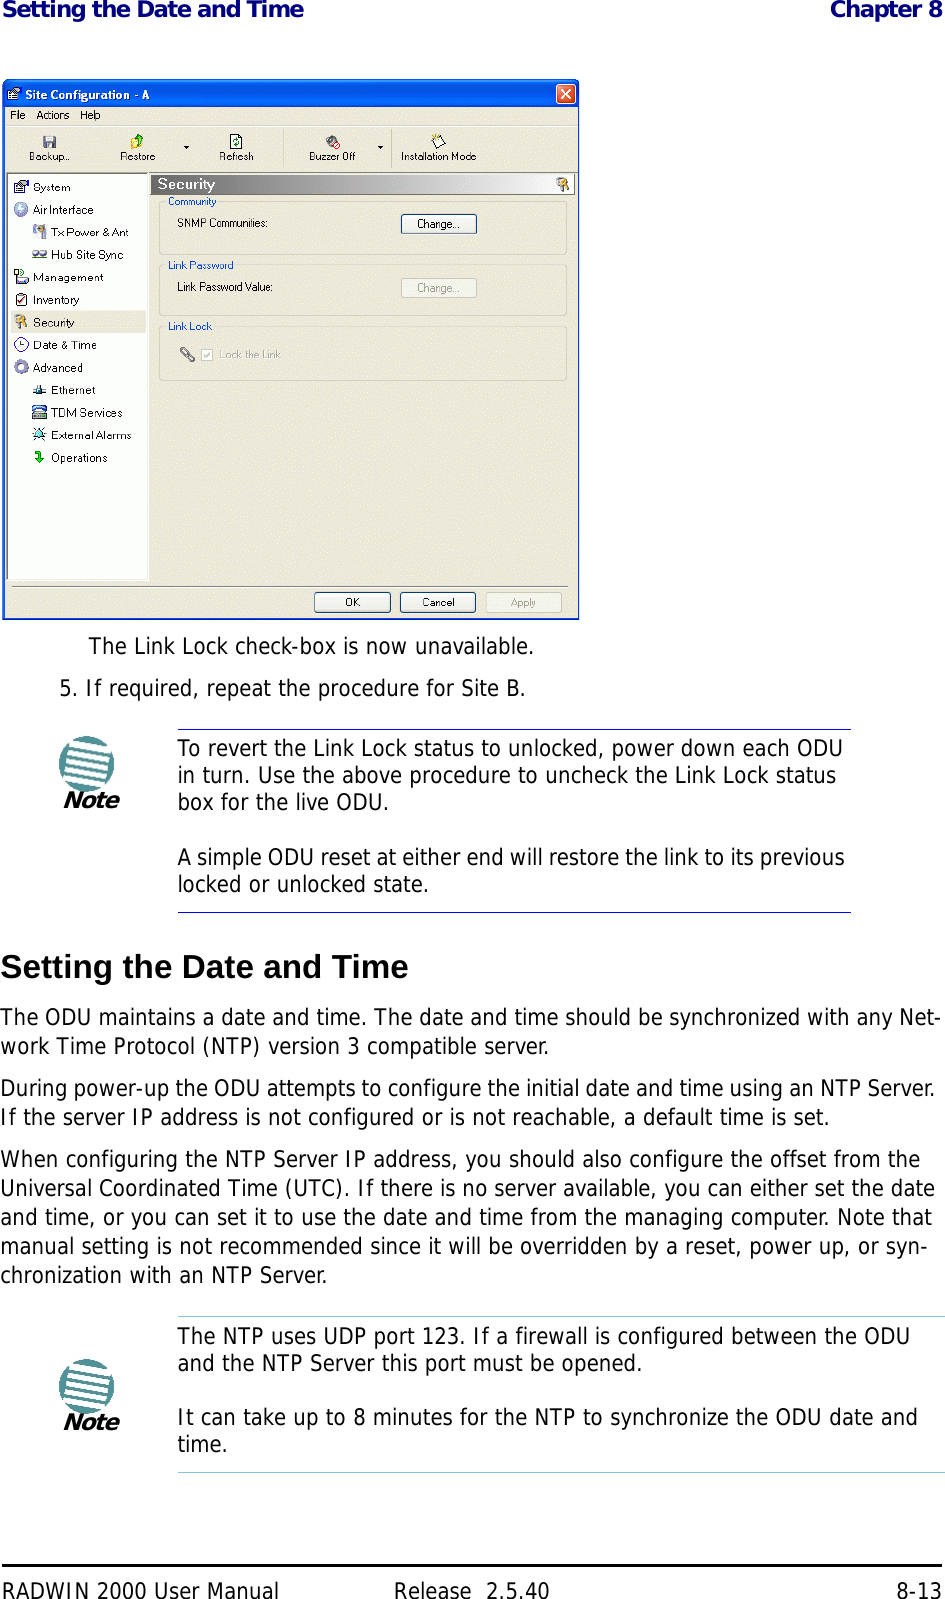 Setting the Date and Time Chapter 8RADWIN 2000 User Manual Release  2.5.40 8-13The Link Lock check-box is now unavailable.5. If required, repeat the procedure for Site B.Setting the Date and TimeThe ODU maintains a date and time. The date and time should be synchronized with any Net-work Time Protocol (NTP) version 3 compatible server.During power-up the ODU attempts to configure the initial date and time using an NTP Server. If the server IP address is not configured or is not reachable, a default time is set.When configuring the NTP Server IP address, you should also configure the offset from the Universal Coordinated Time (UTC). If there is no server available, you can either set the date and time, or you can set it to use the date and time from the managing computer. Note that manual setting is not recommended since it will be overridden by a reset, power up, or syn-chronization with an NTP Server.NoteTo revert the Link Lock status to unlocked, power down each ODU in turn. Use the above procedure to uncheck the Link Lock status box for the live ODU.A simple ODU reset at either end will restore the link to its previous locked or unlocked state.NoteThe NTP uses UDP port 123. If a firewall is configured between the ODU and the NTP Server this port must be opened.It can take up to 8 minutes for the NTP to synchronize the ODU date and time.